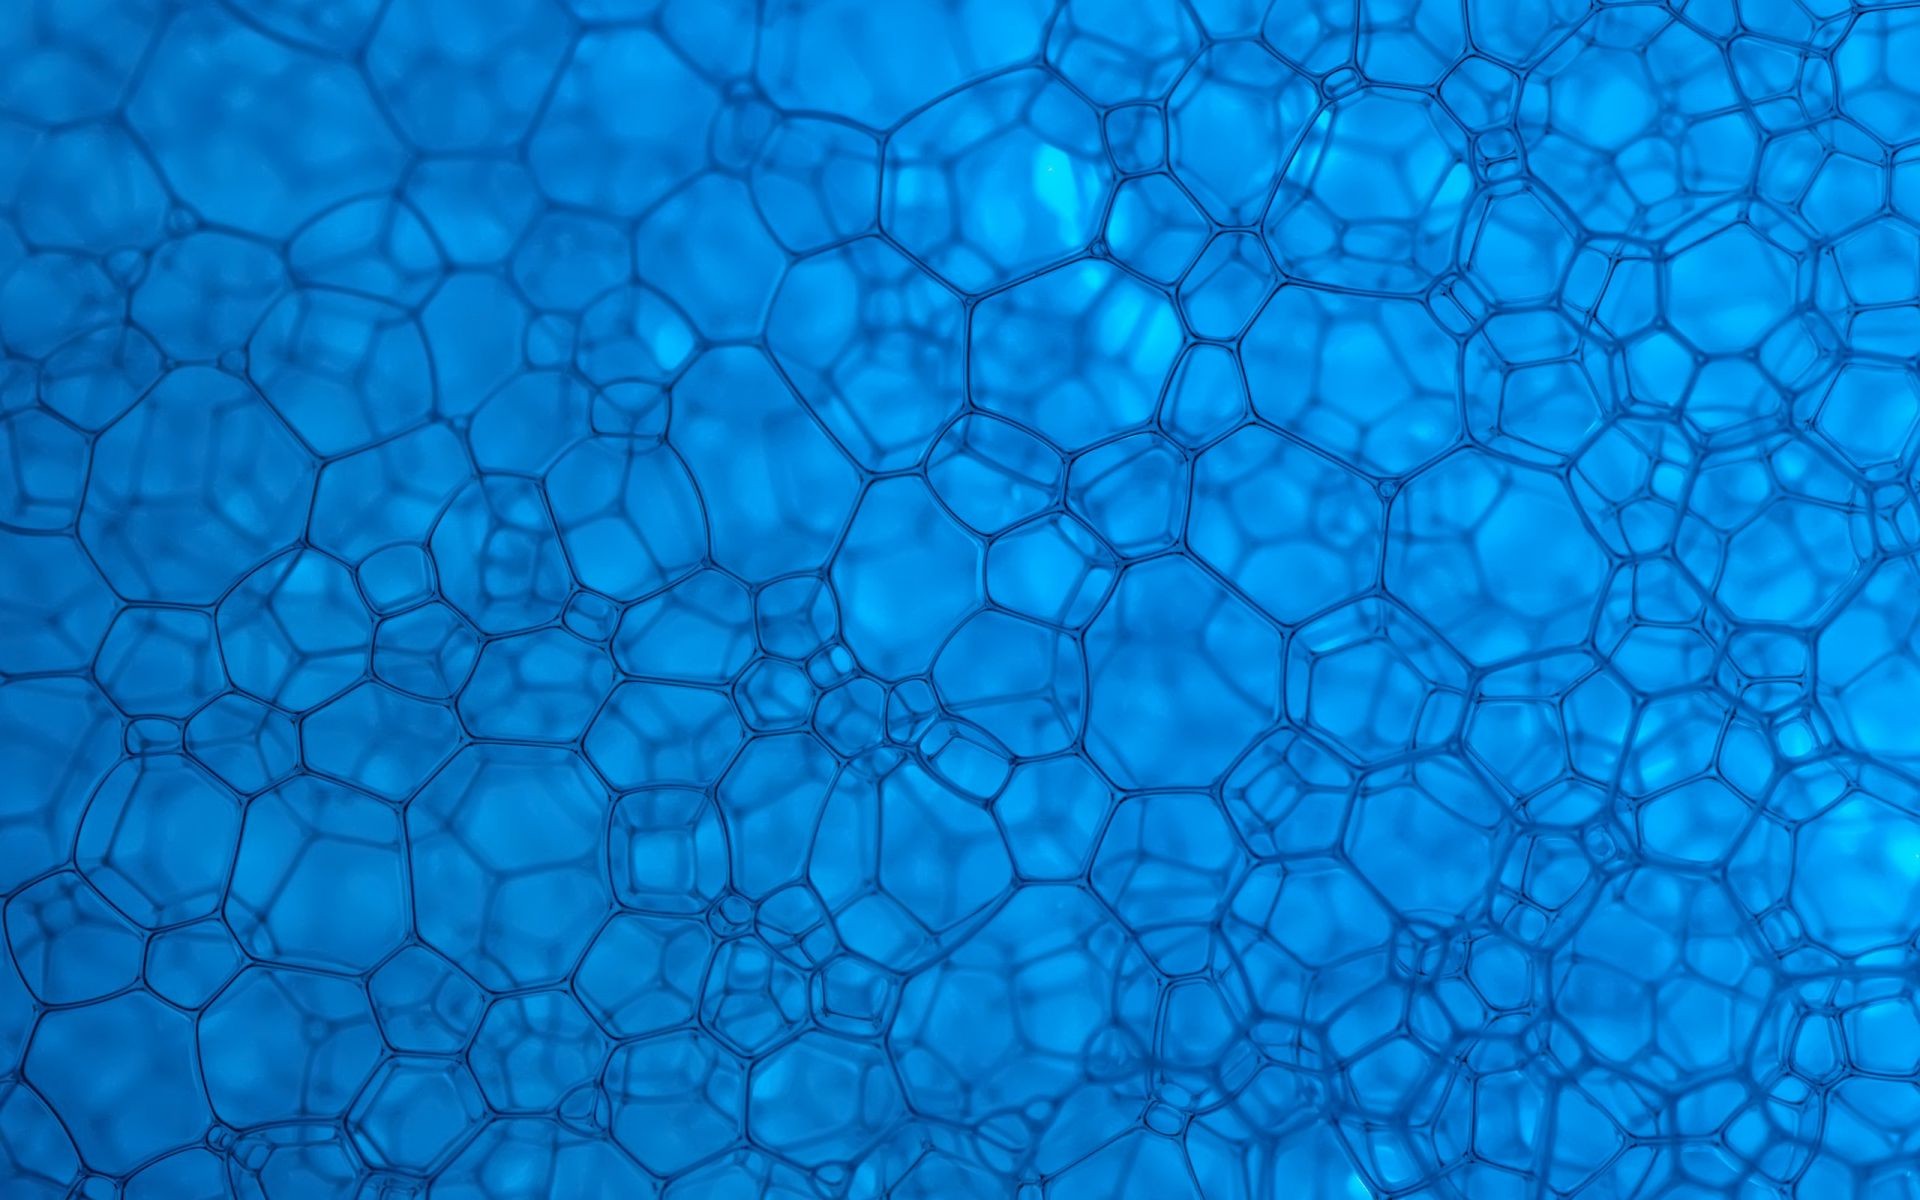 texture cellular telephone abstract pattern wallpaper desktop turquoise background water shape cluster clear bright liquid wet underwater design light art dynamic